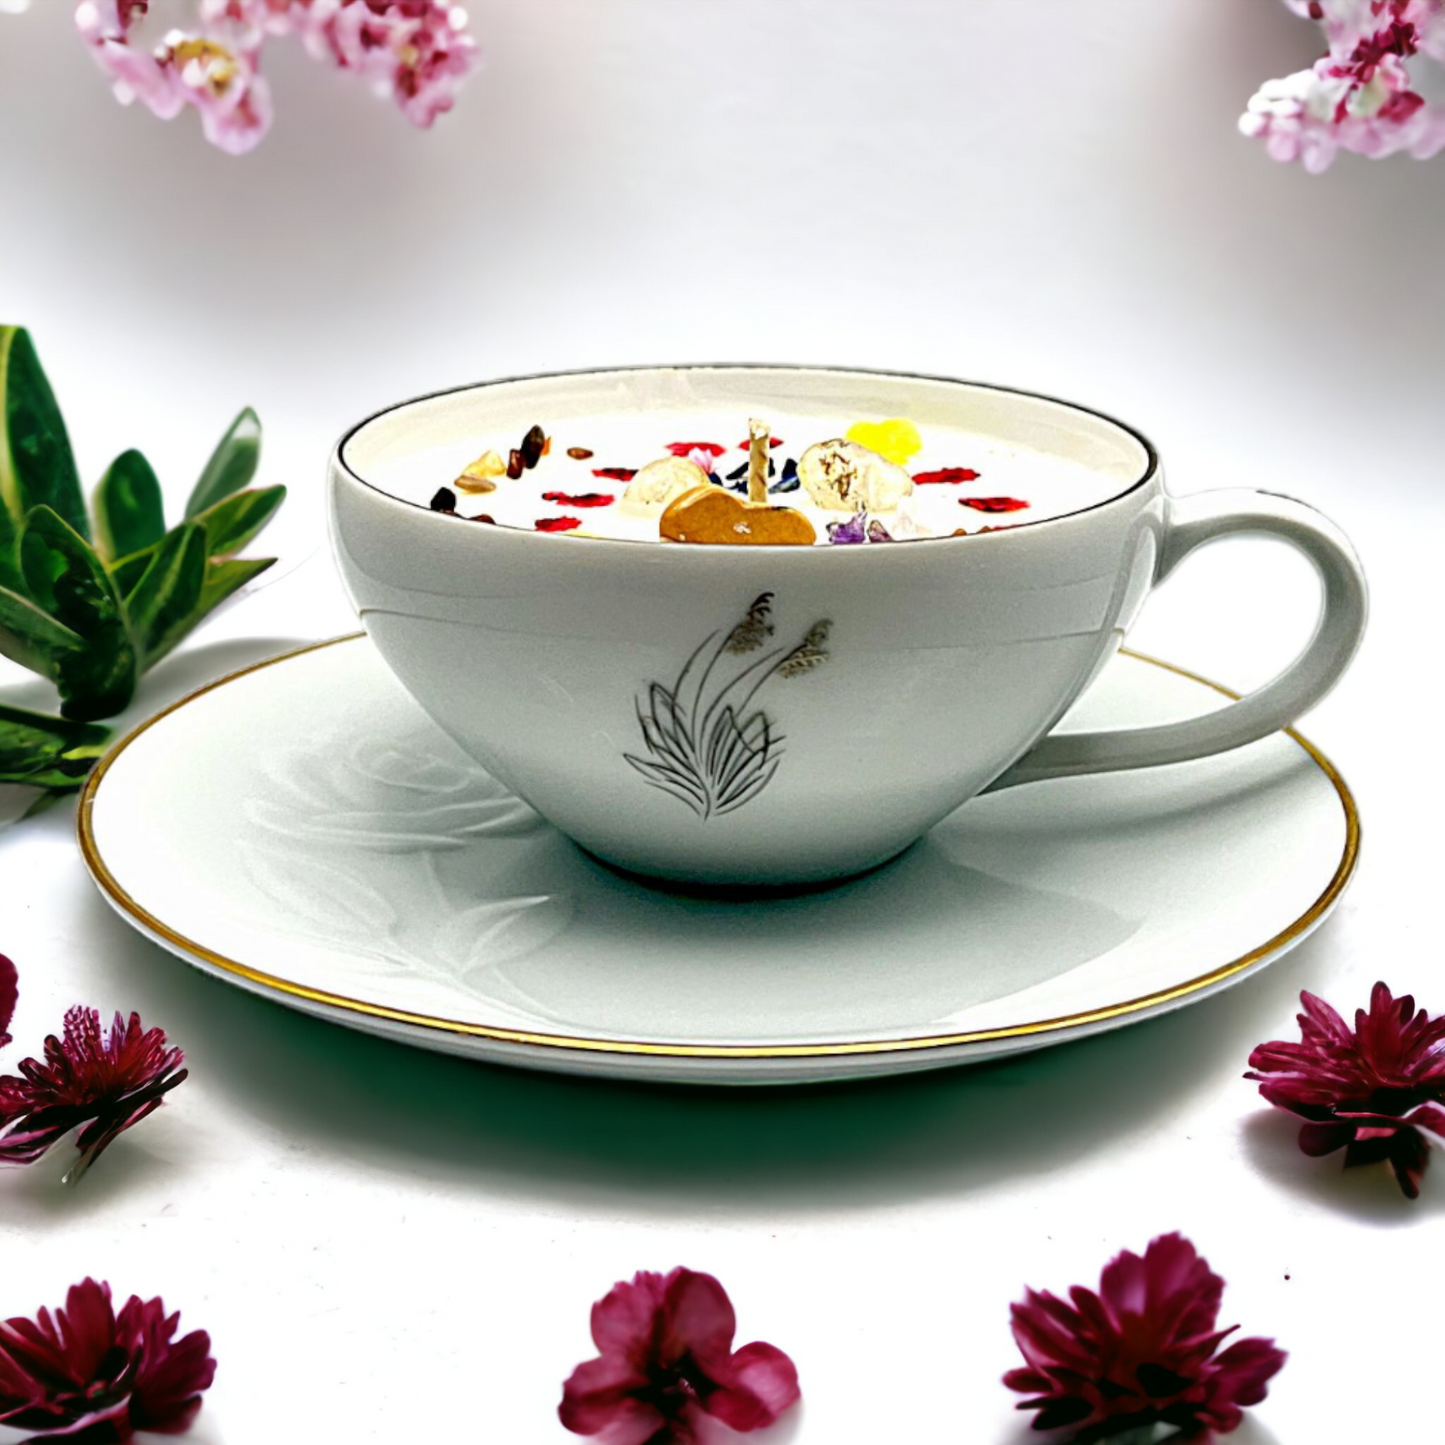 Japanese Combined Beauty of Noritake and Arita Vintage Teacup Candle